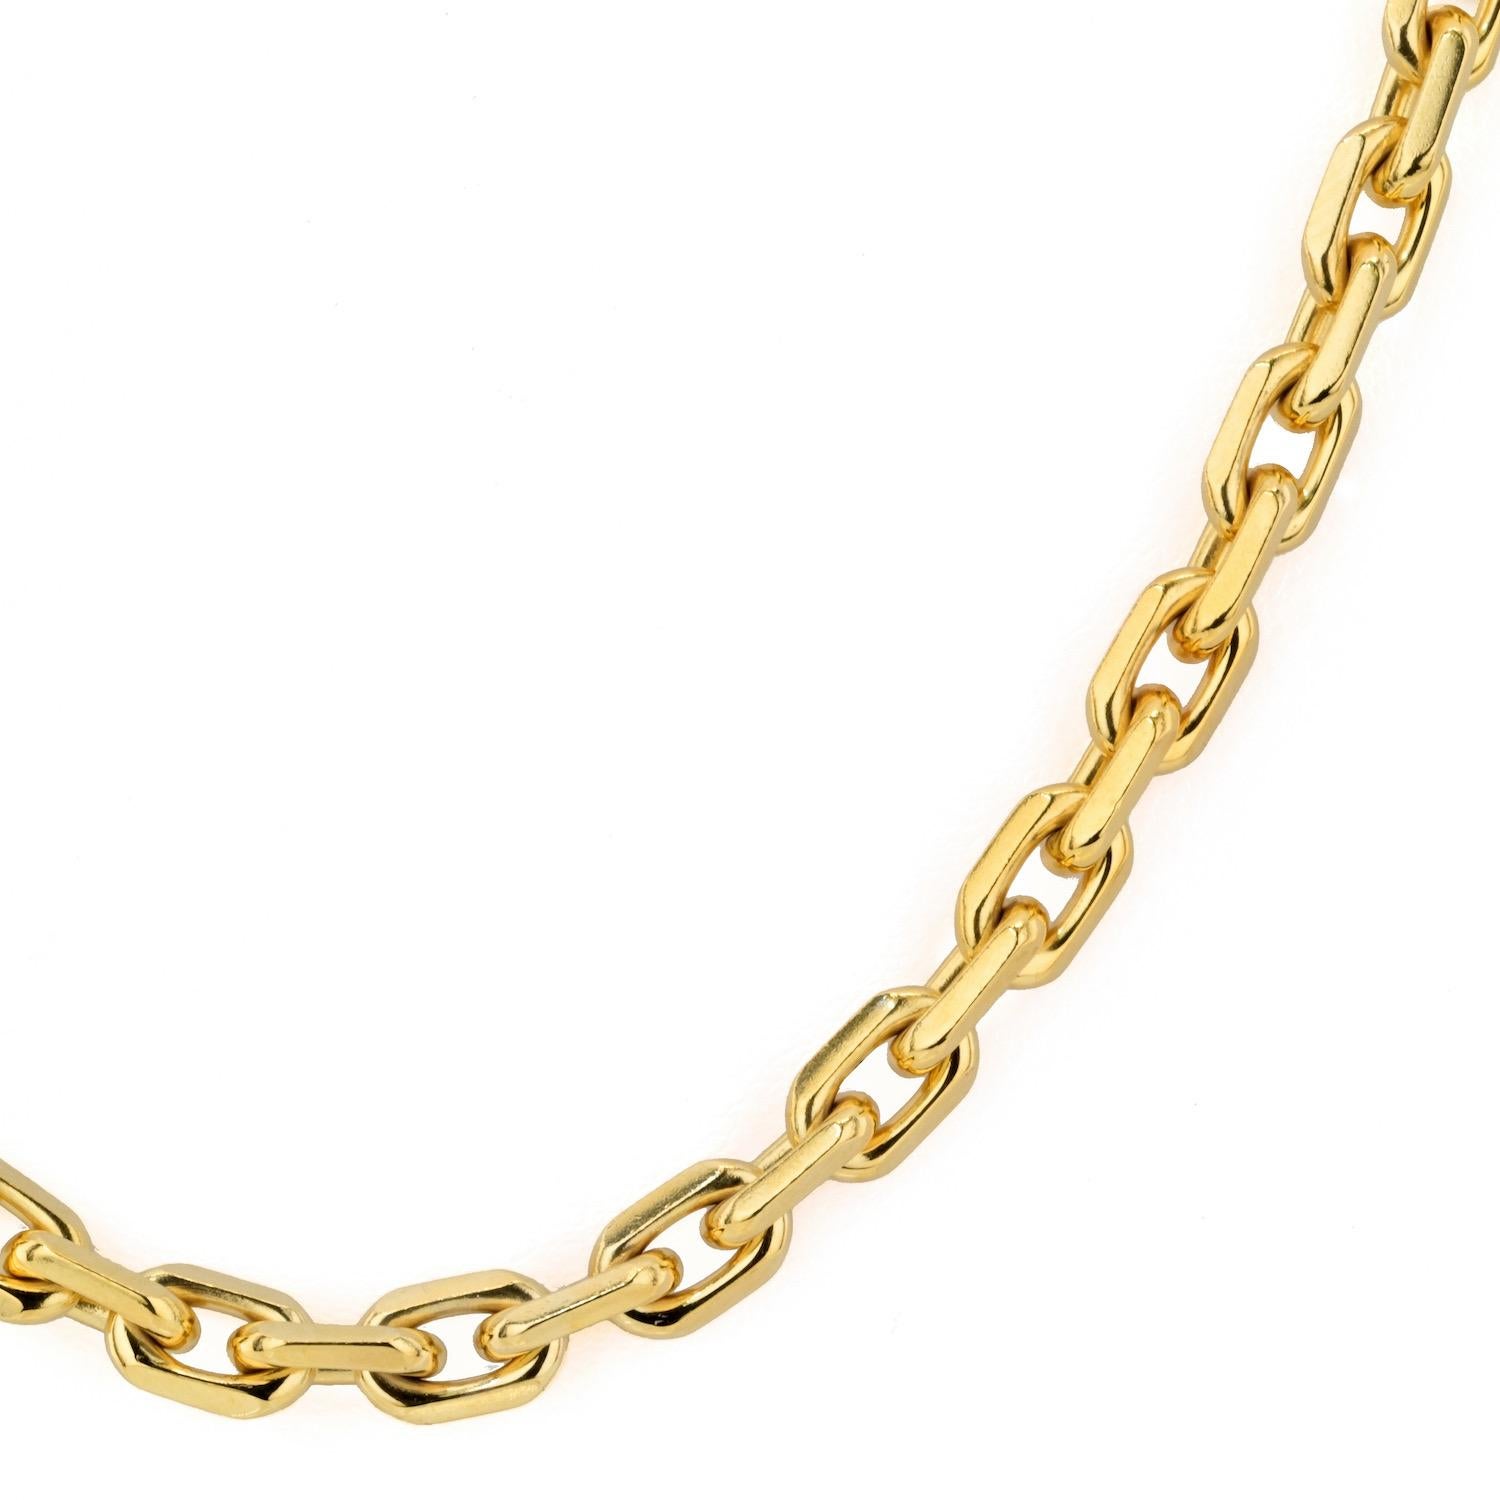 Boucheron 18 Karat Yellow Gold 35 Inches Long Chain Necklace In Excellent Condition For Sale In New York, NY